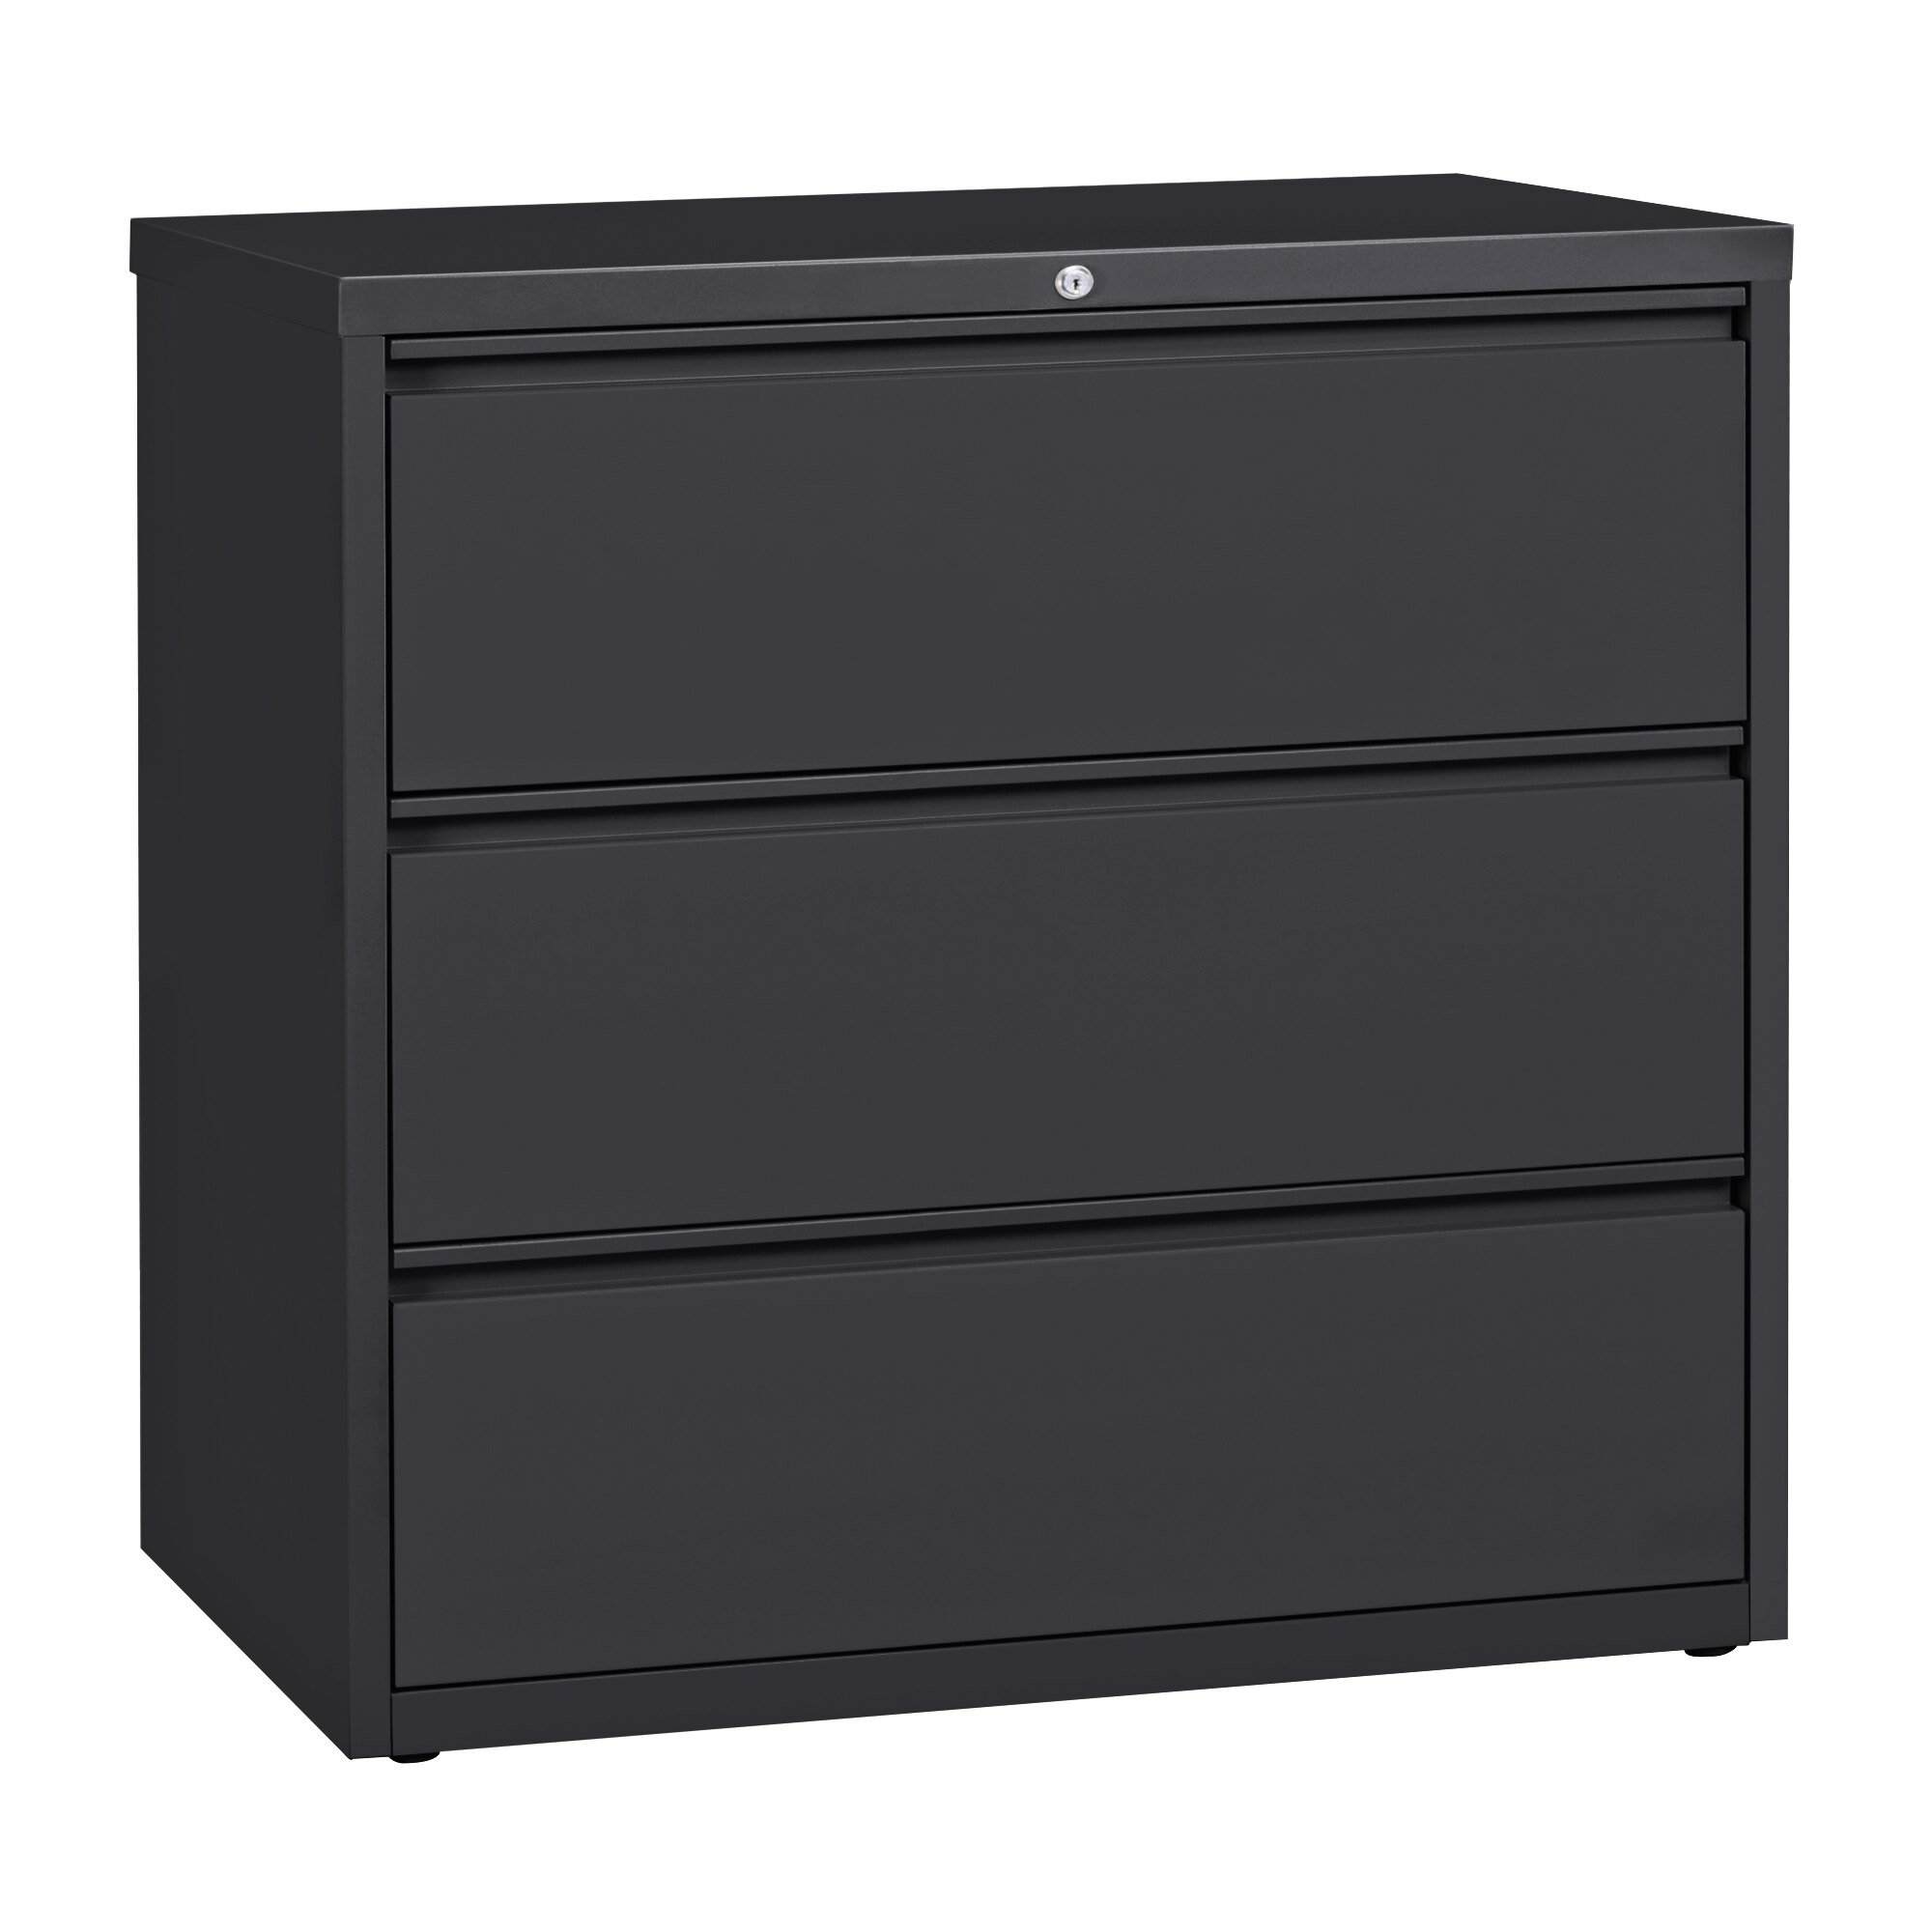 Hirsh Industries 17646 Charcoal ThreeDrawer Lateral File